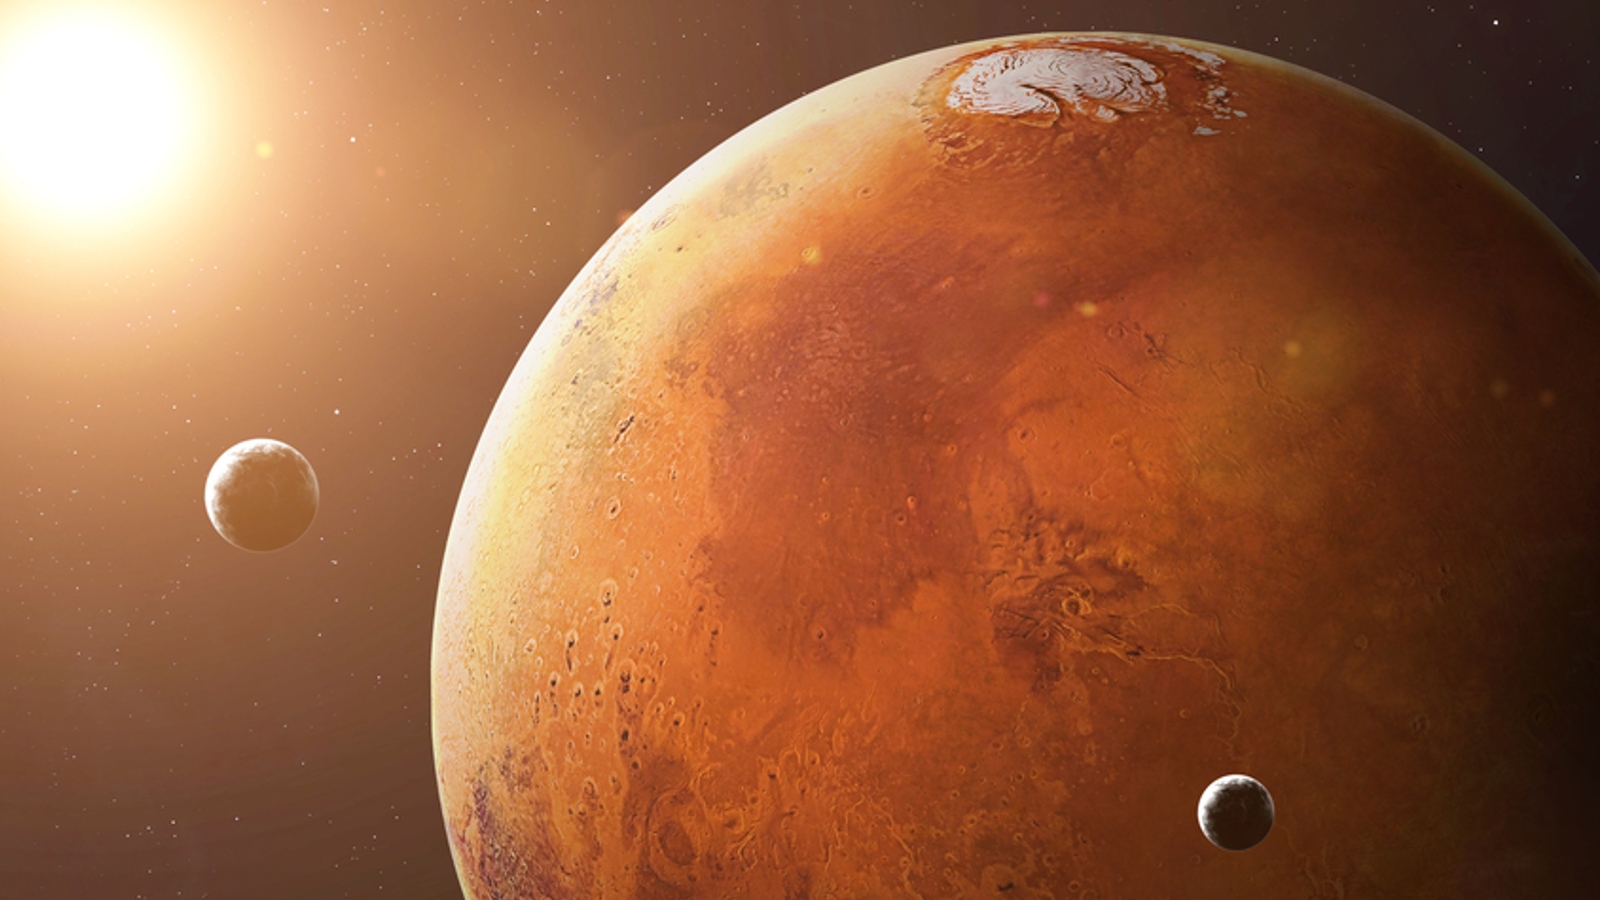 NASA may have accidentally destroyed life on Mars 50 years ago